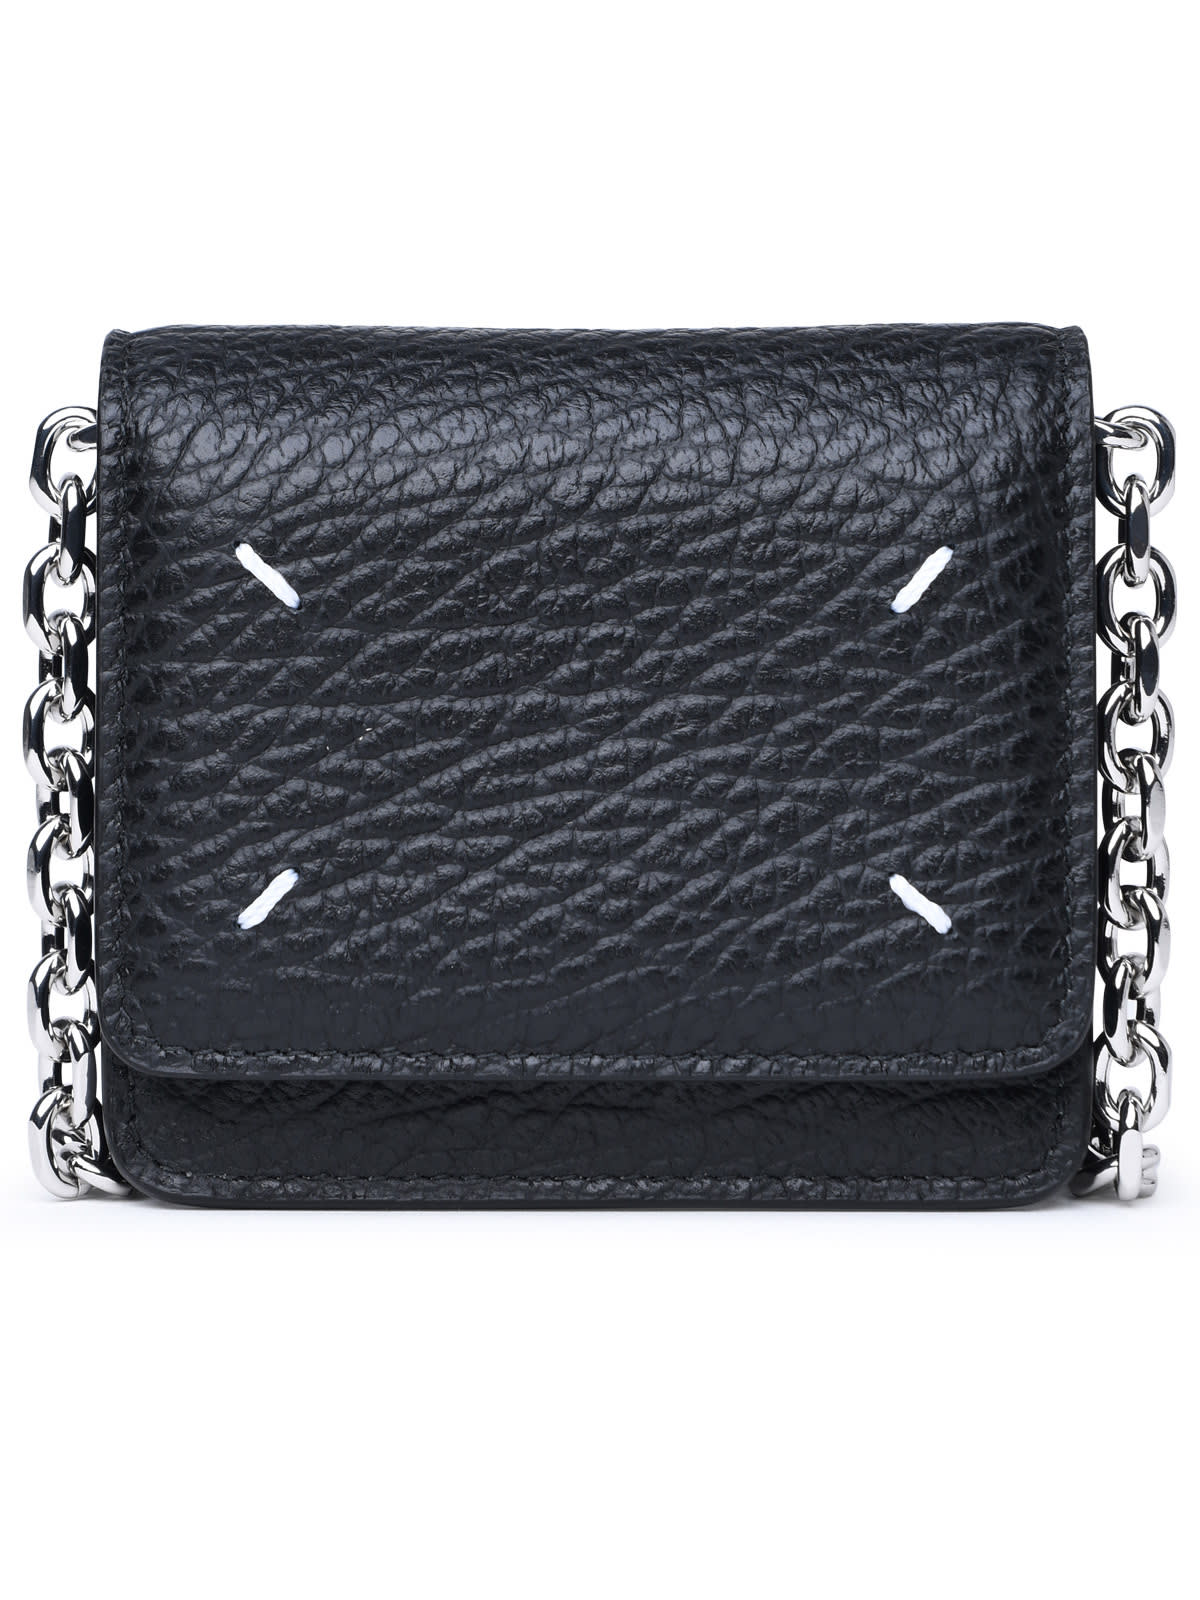 four Stitches Black Calf Leather Wallet